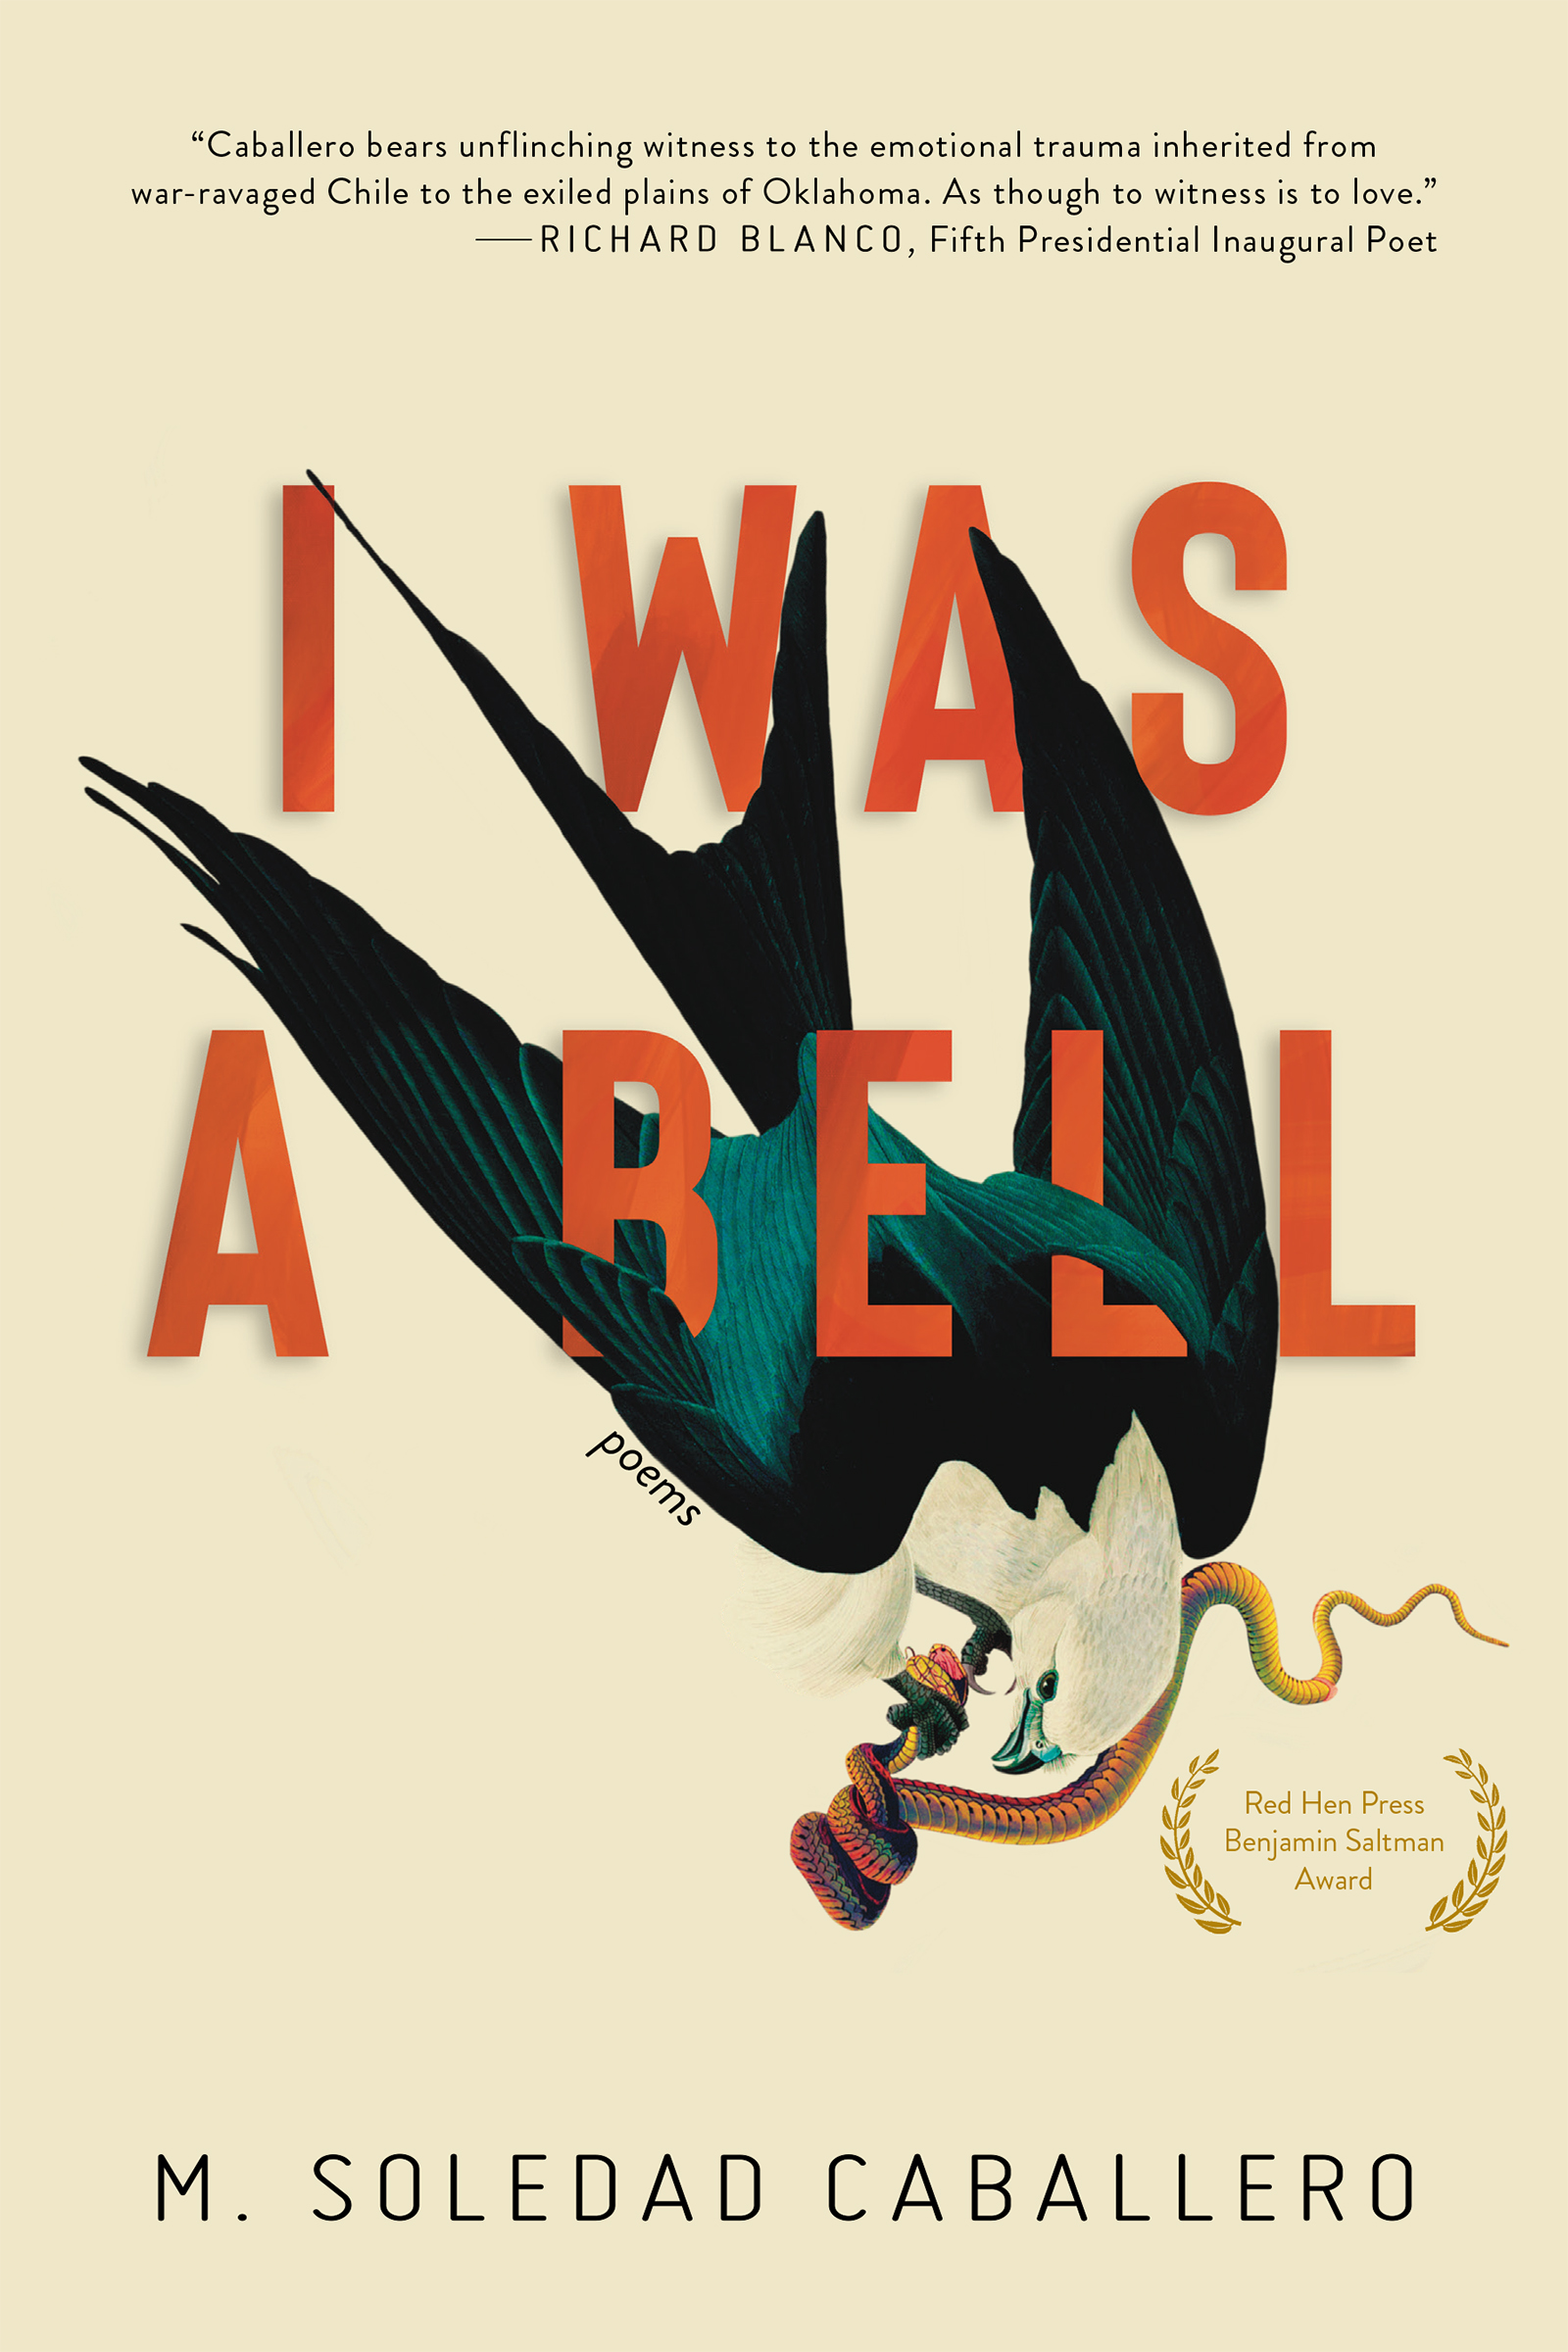 A graphic design of a green and white bird with red script over it that reads I was a Bell by M. Soledad Caballero.